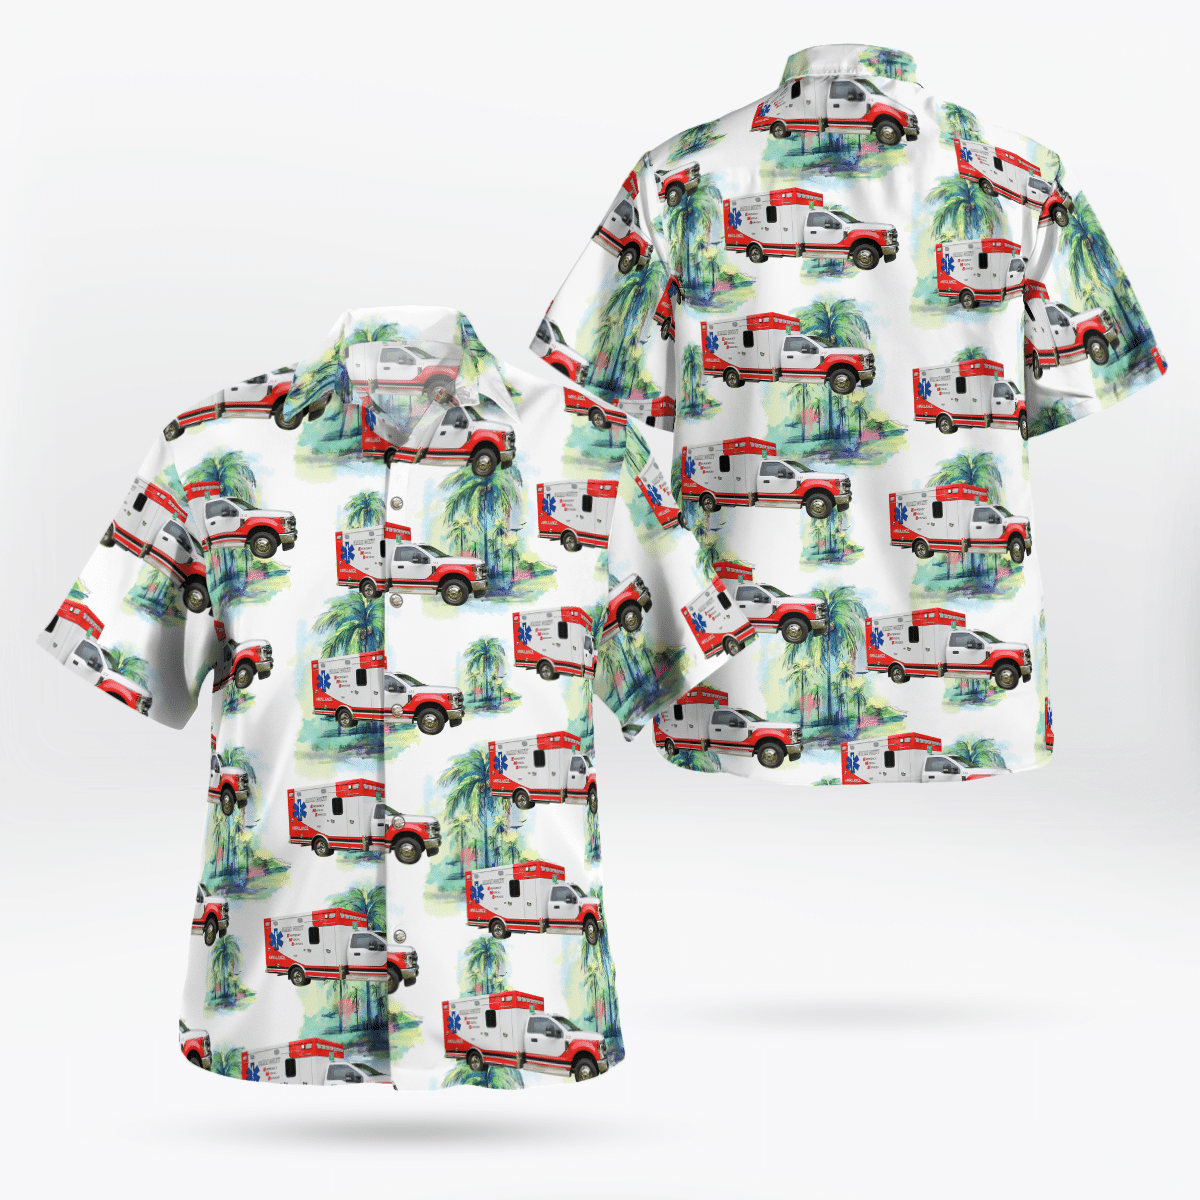 If you are in need of a new summertime look, pick up this Hawaiian shirt 46